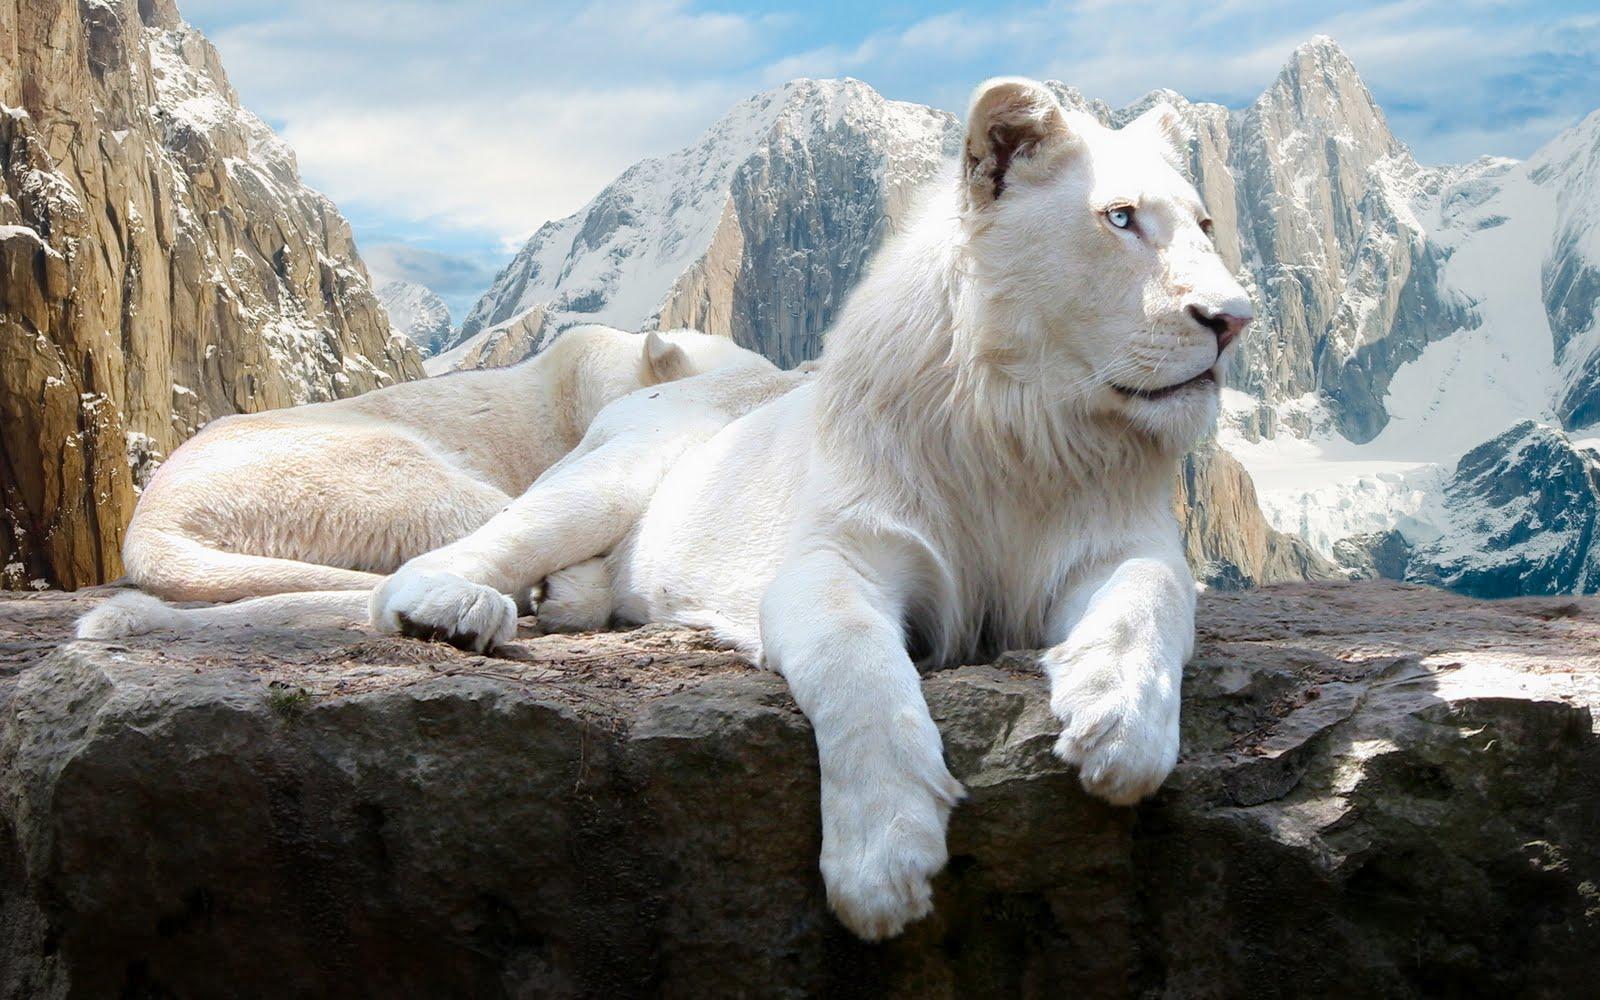 According to the legend of the Shangaan, white lions are